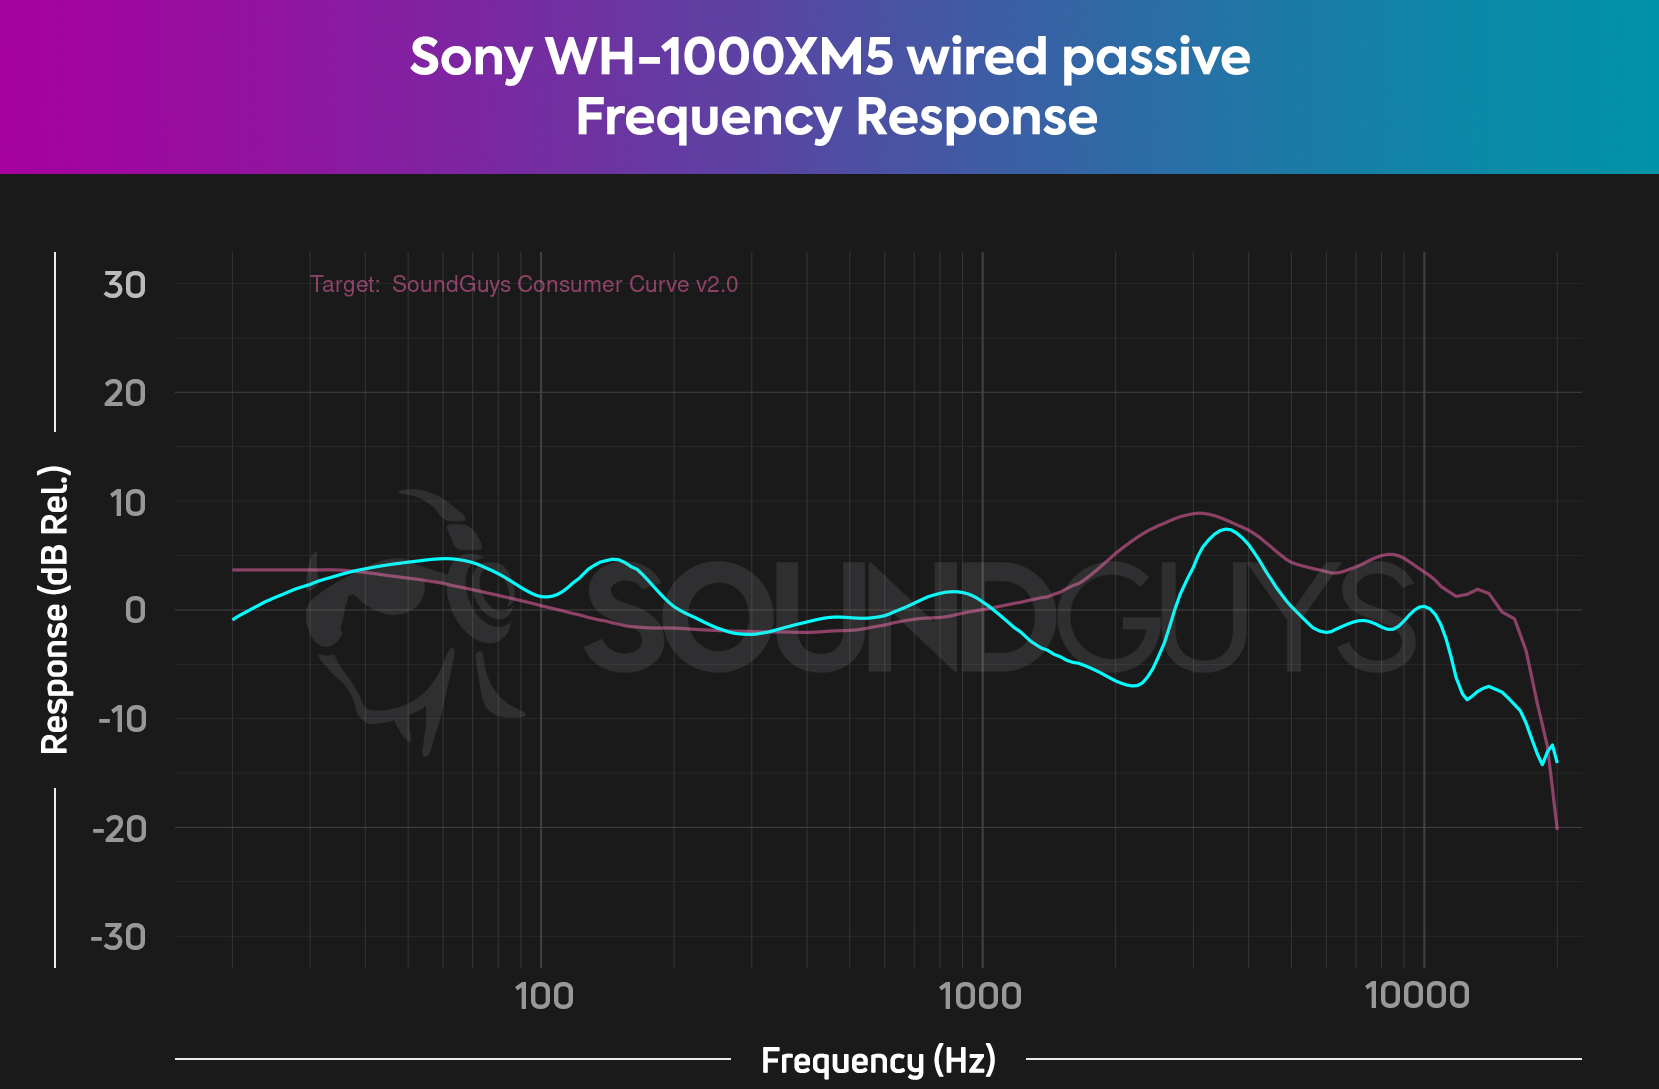 The Sony WH-1000XM5 in wired, passive mode has a very different sound from the active profile.